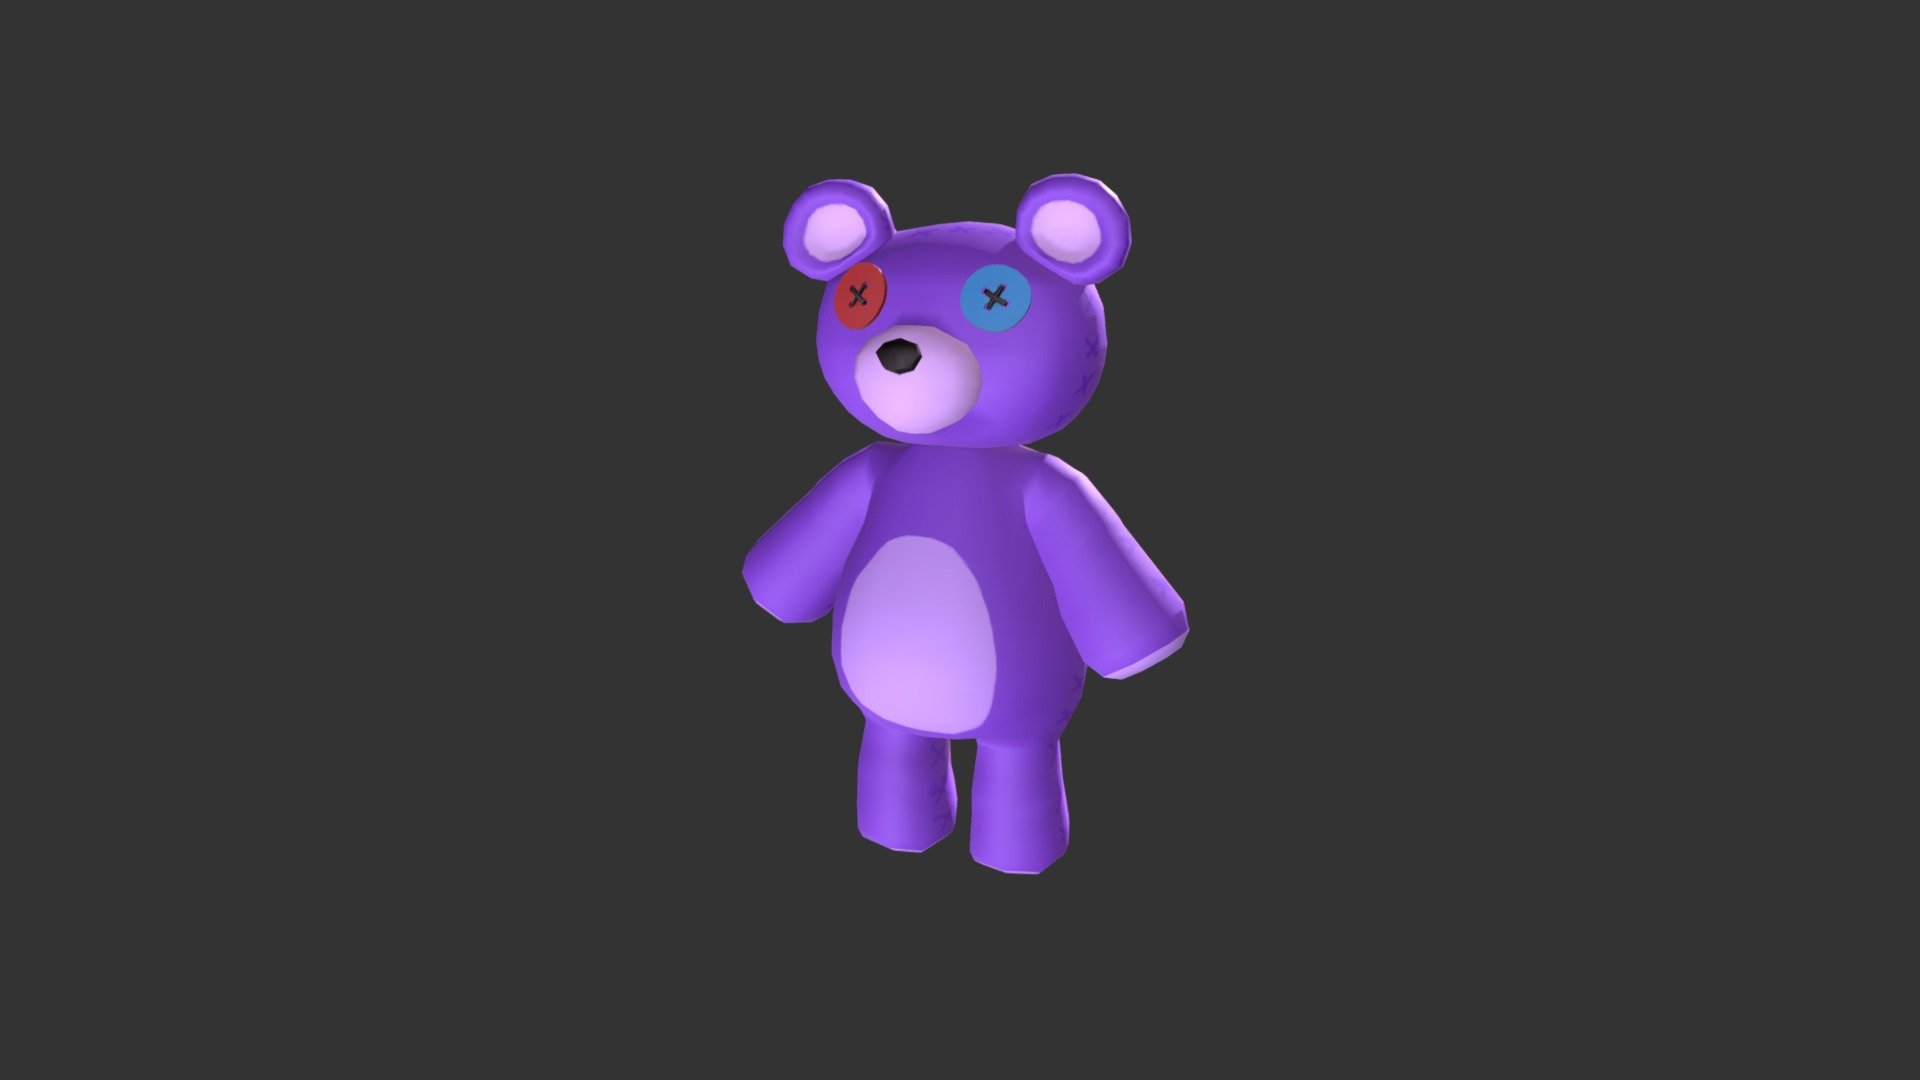 Idle animation for a normal teddy bear in a video game. I made the animation and co-created the model with ryemartinhttps://sketchfab.com/ryemartin 3d model